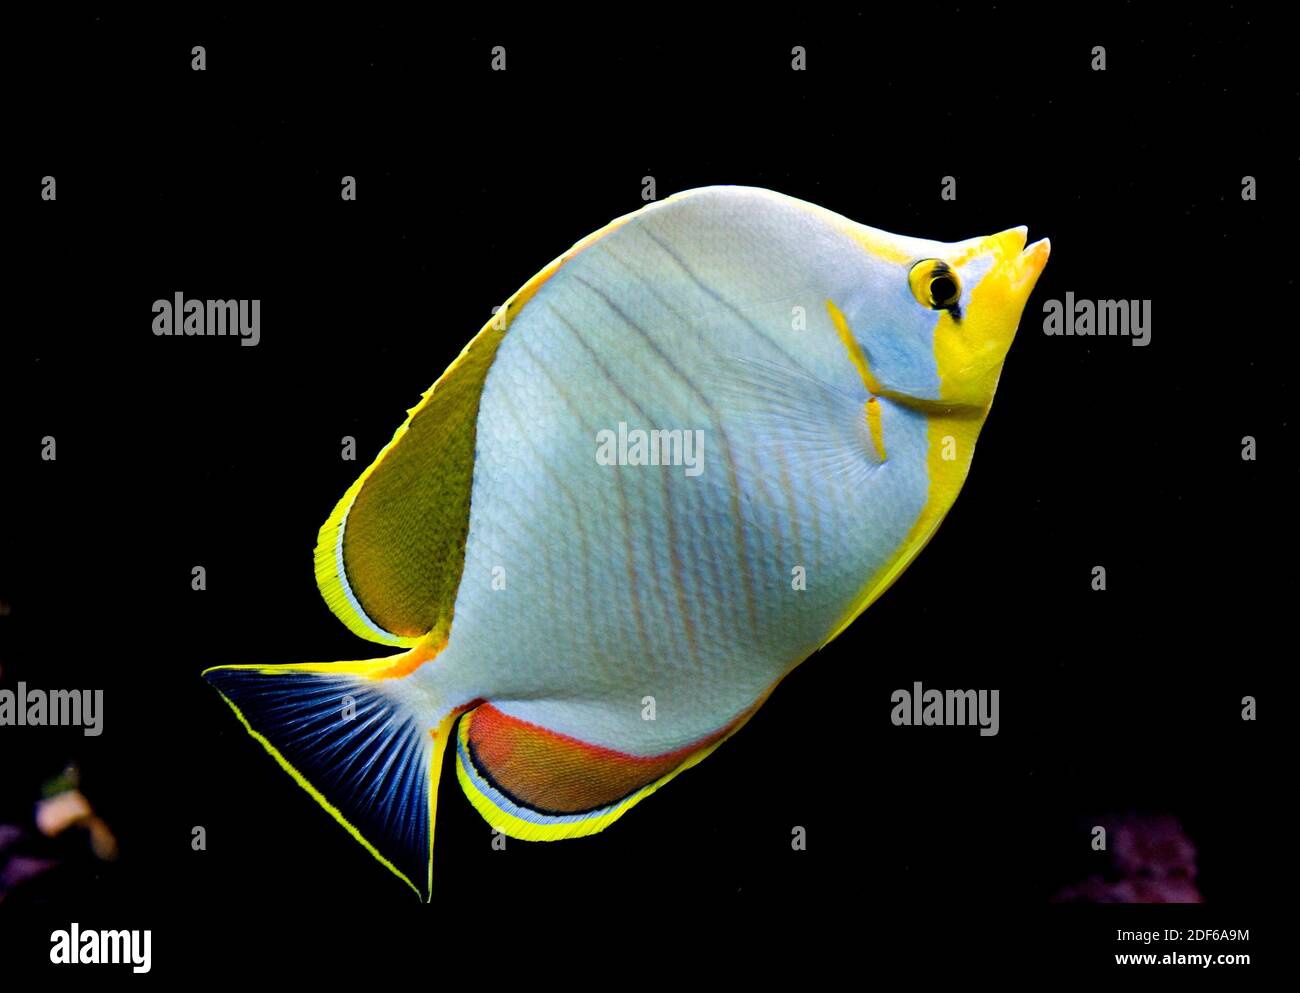 Yellowhead butterflyfish (Chaetodon xanthocephalus) is a tropical fish solitary, omnivorous, territorial and aggressive. Family Chaetodontidae. Stock Photo